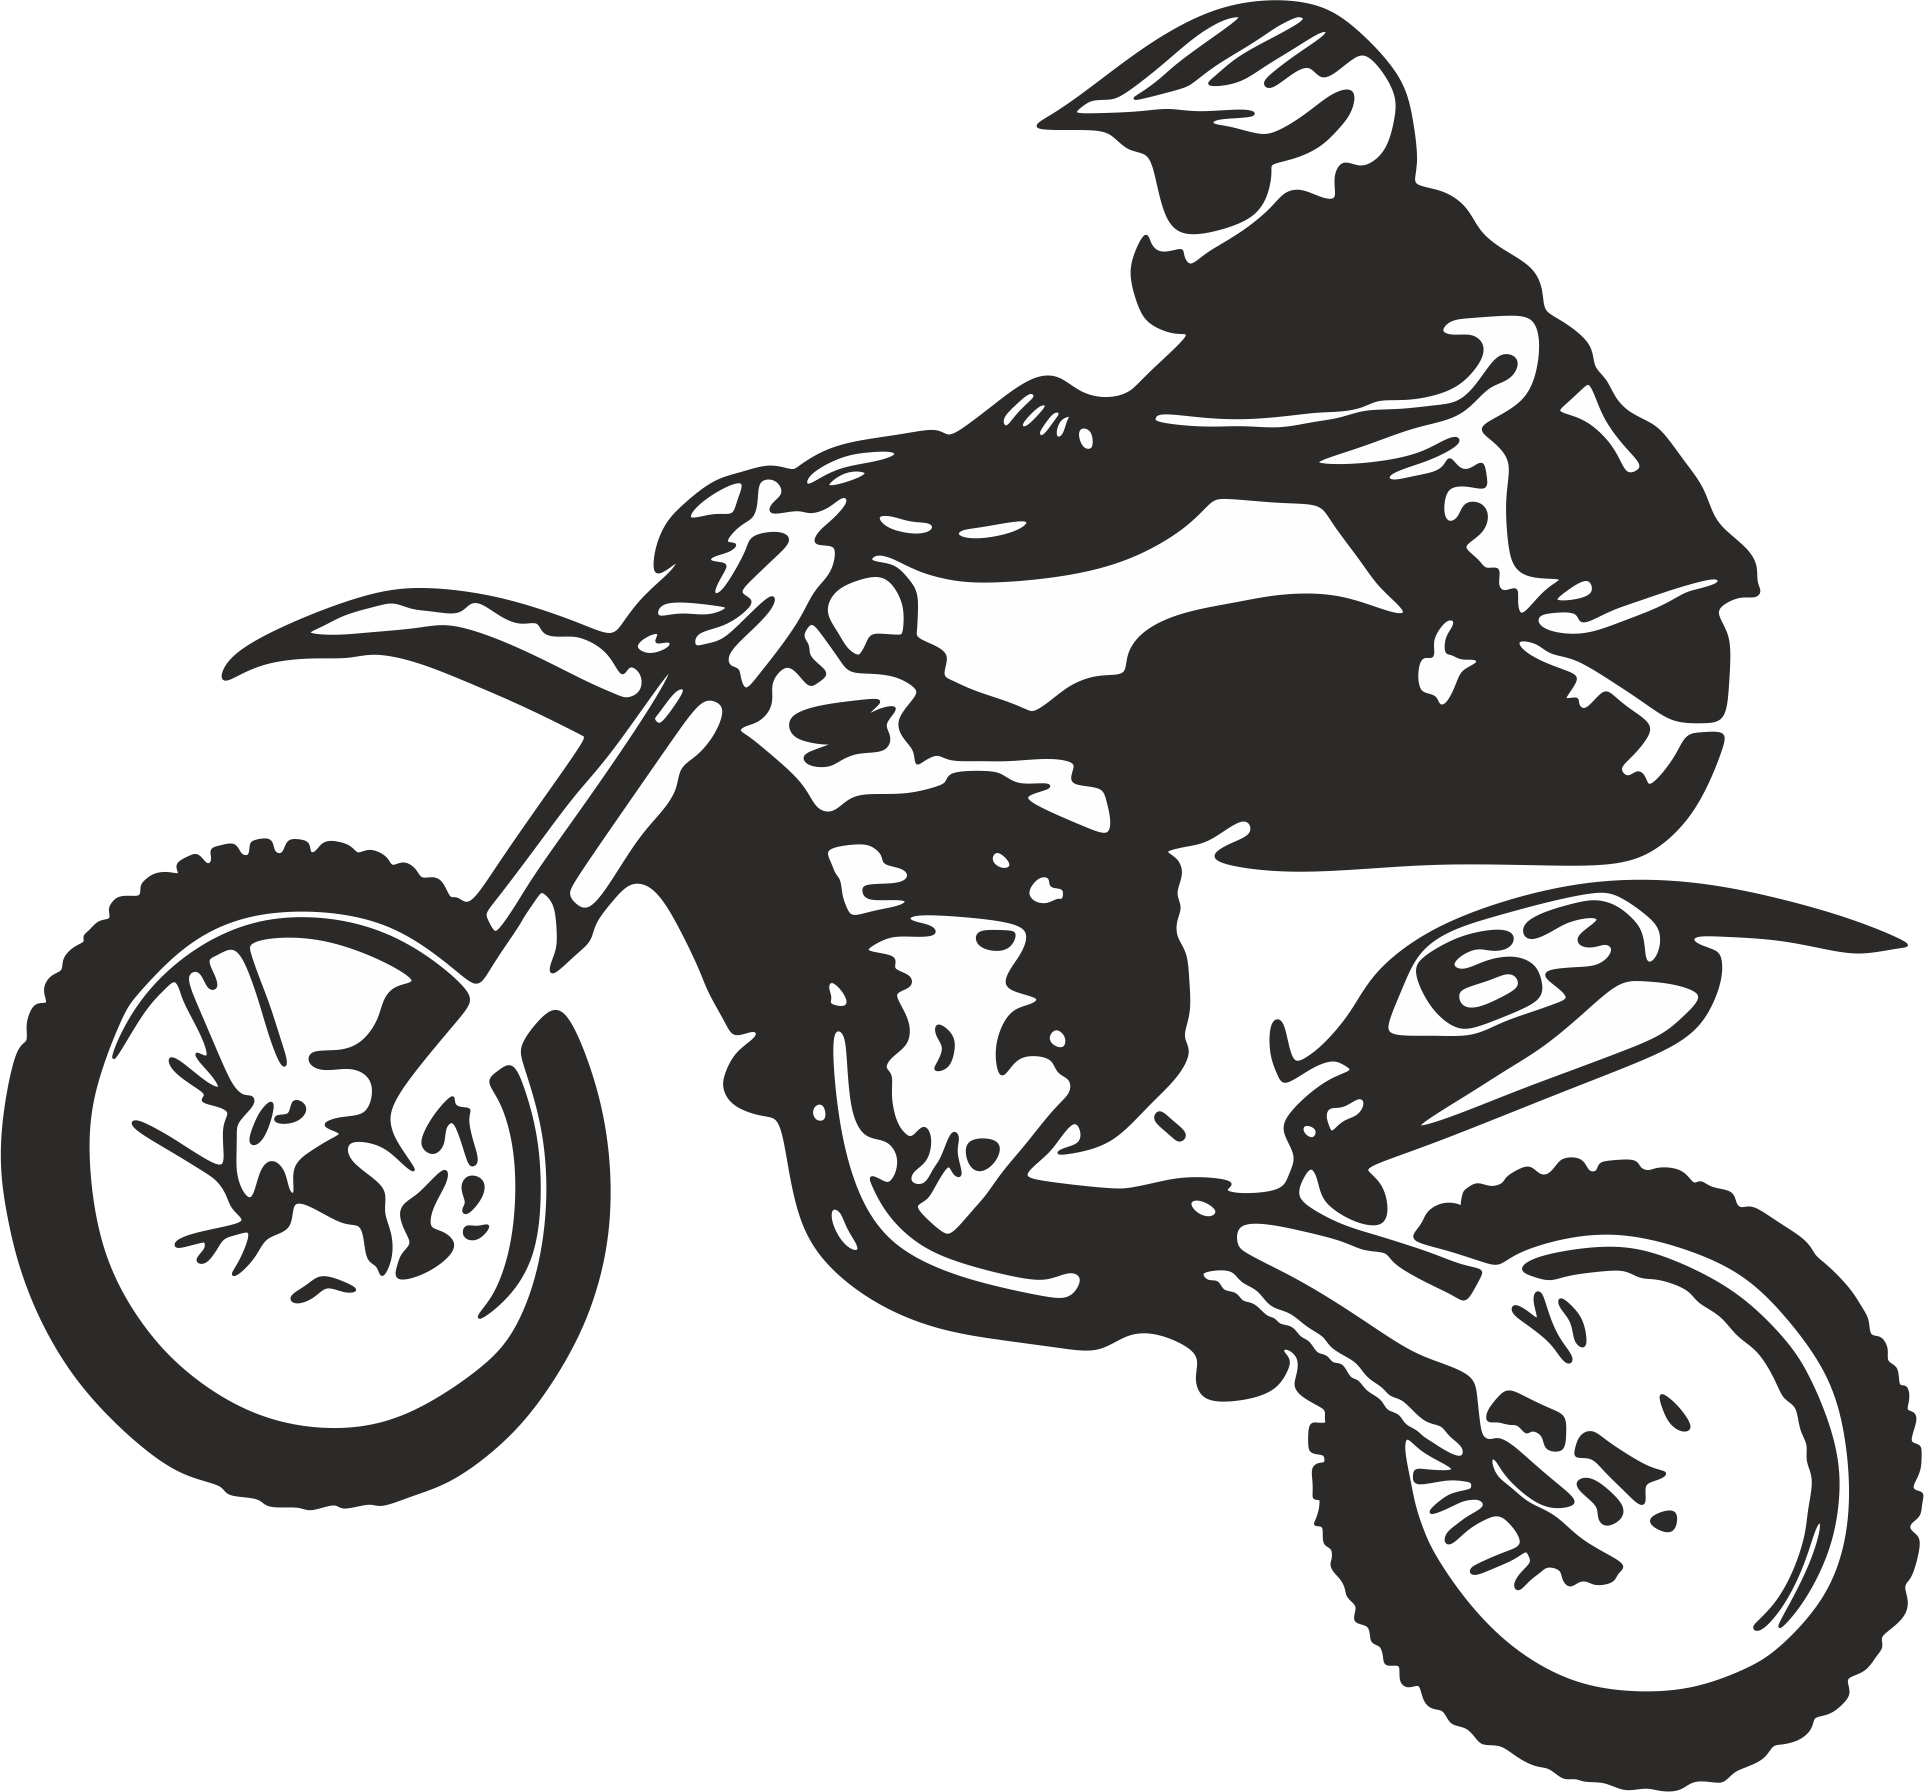 Download Icon Moto 1 - Dirt Bike Wheelie Logo PNG Image with No Backgroud -...